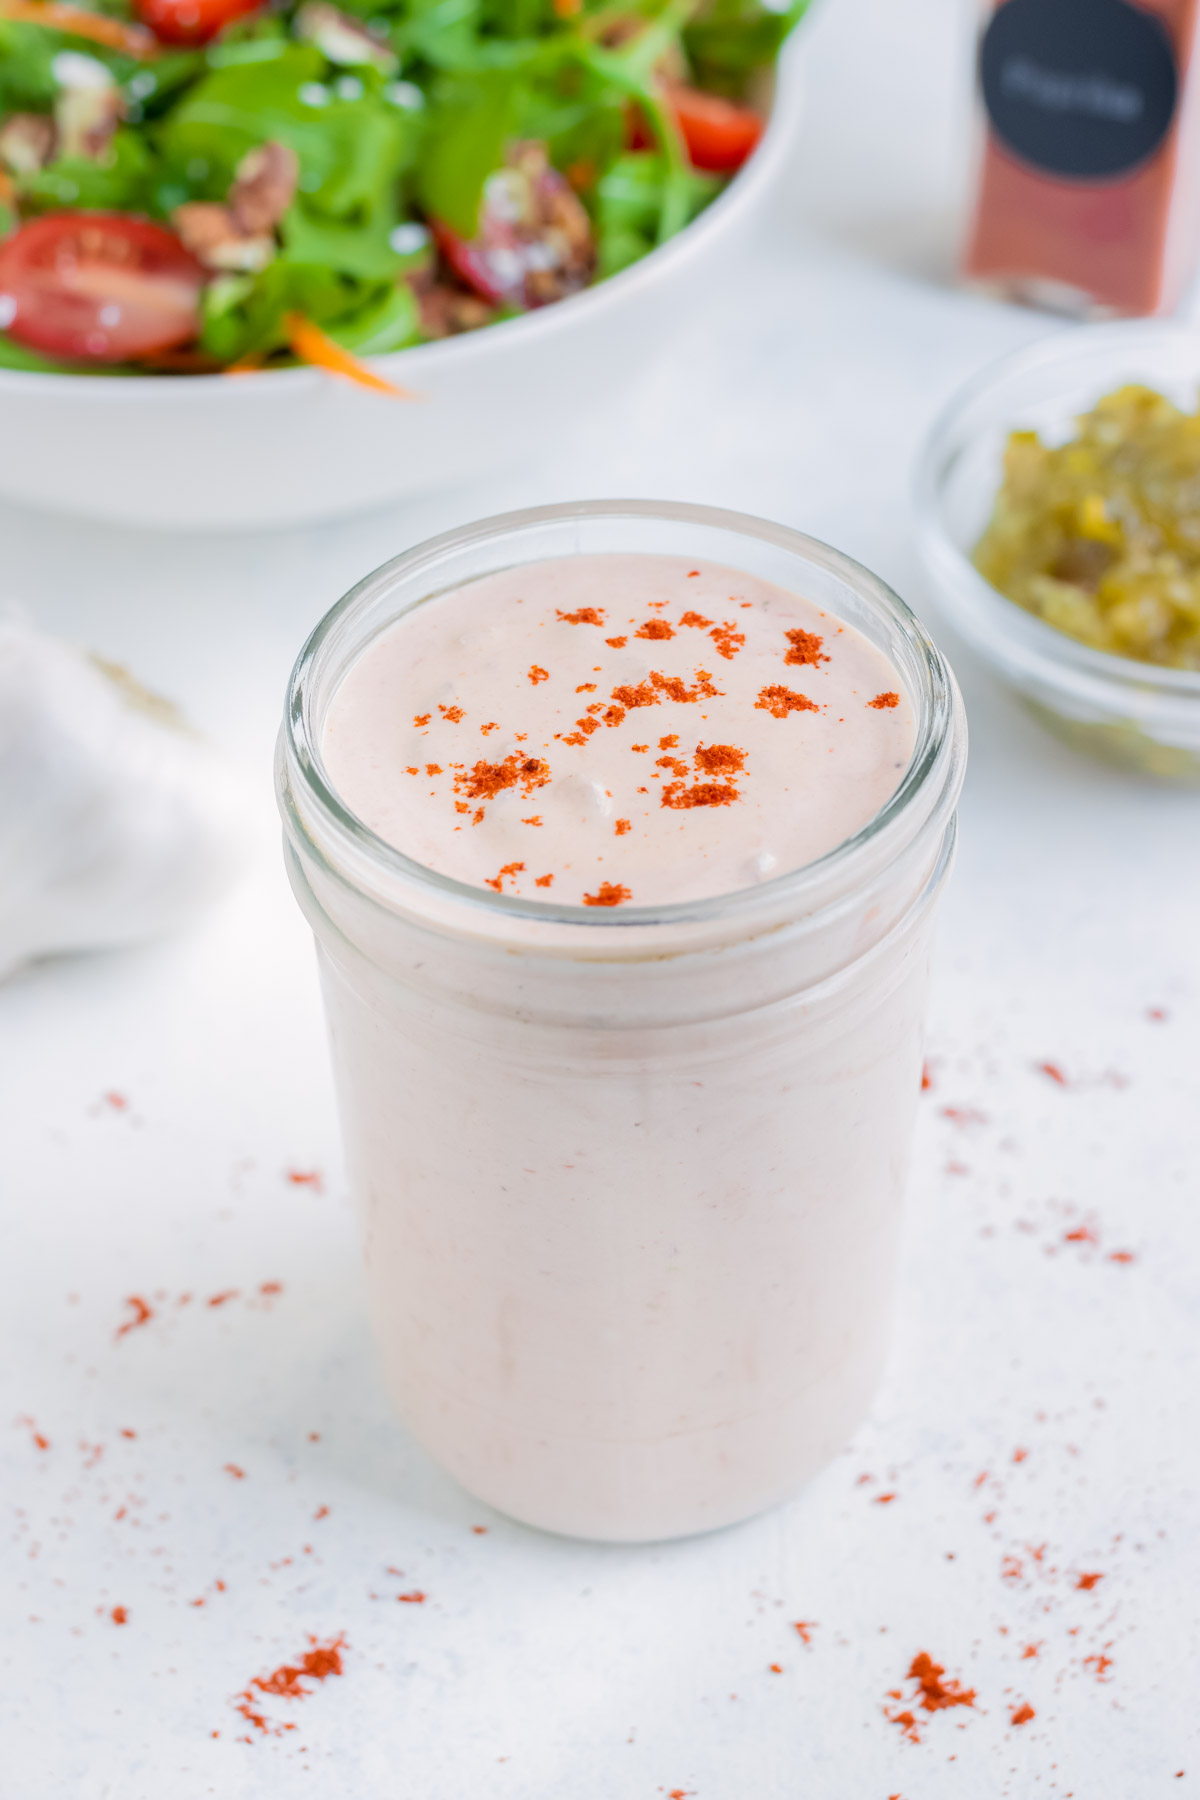 Homemade thousand island salad dressing is stored in a mason jar.